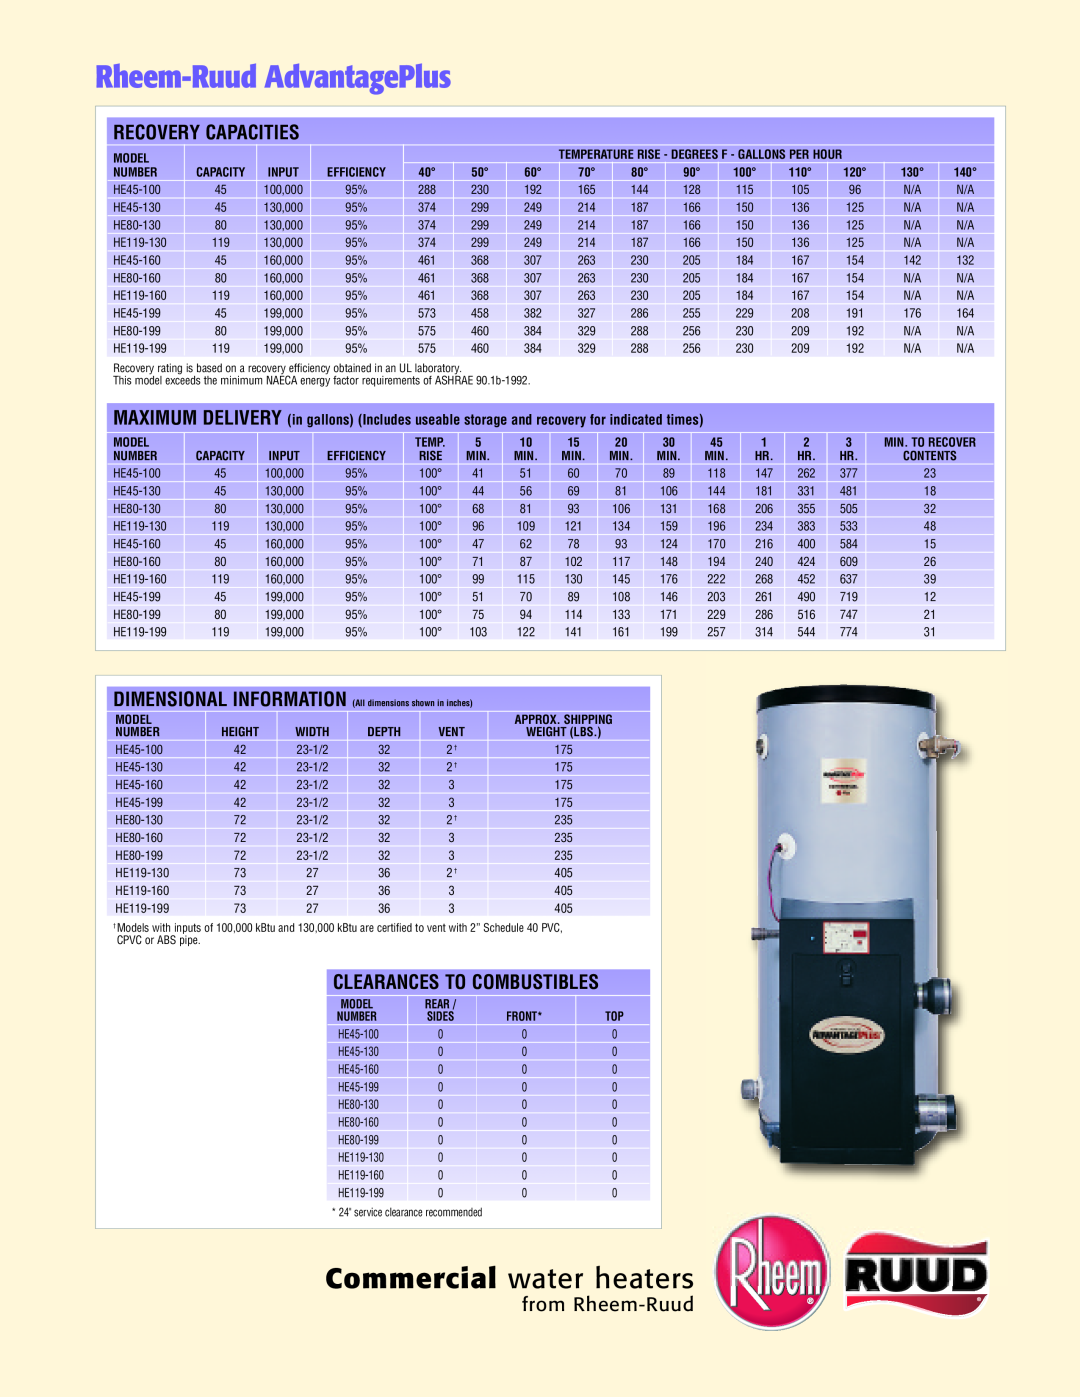 Rheem Advantage Plus Rheem-Ruud AdvantagePlus, Recovery Capacities, Clearances To Combustibles, Commercial water heaters 